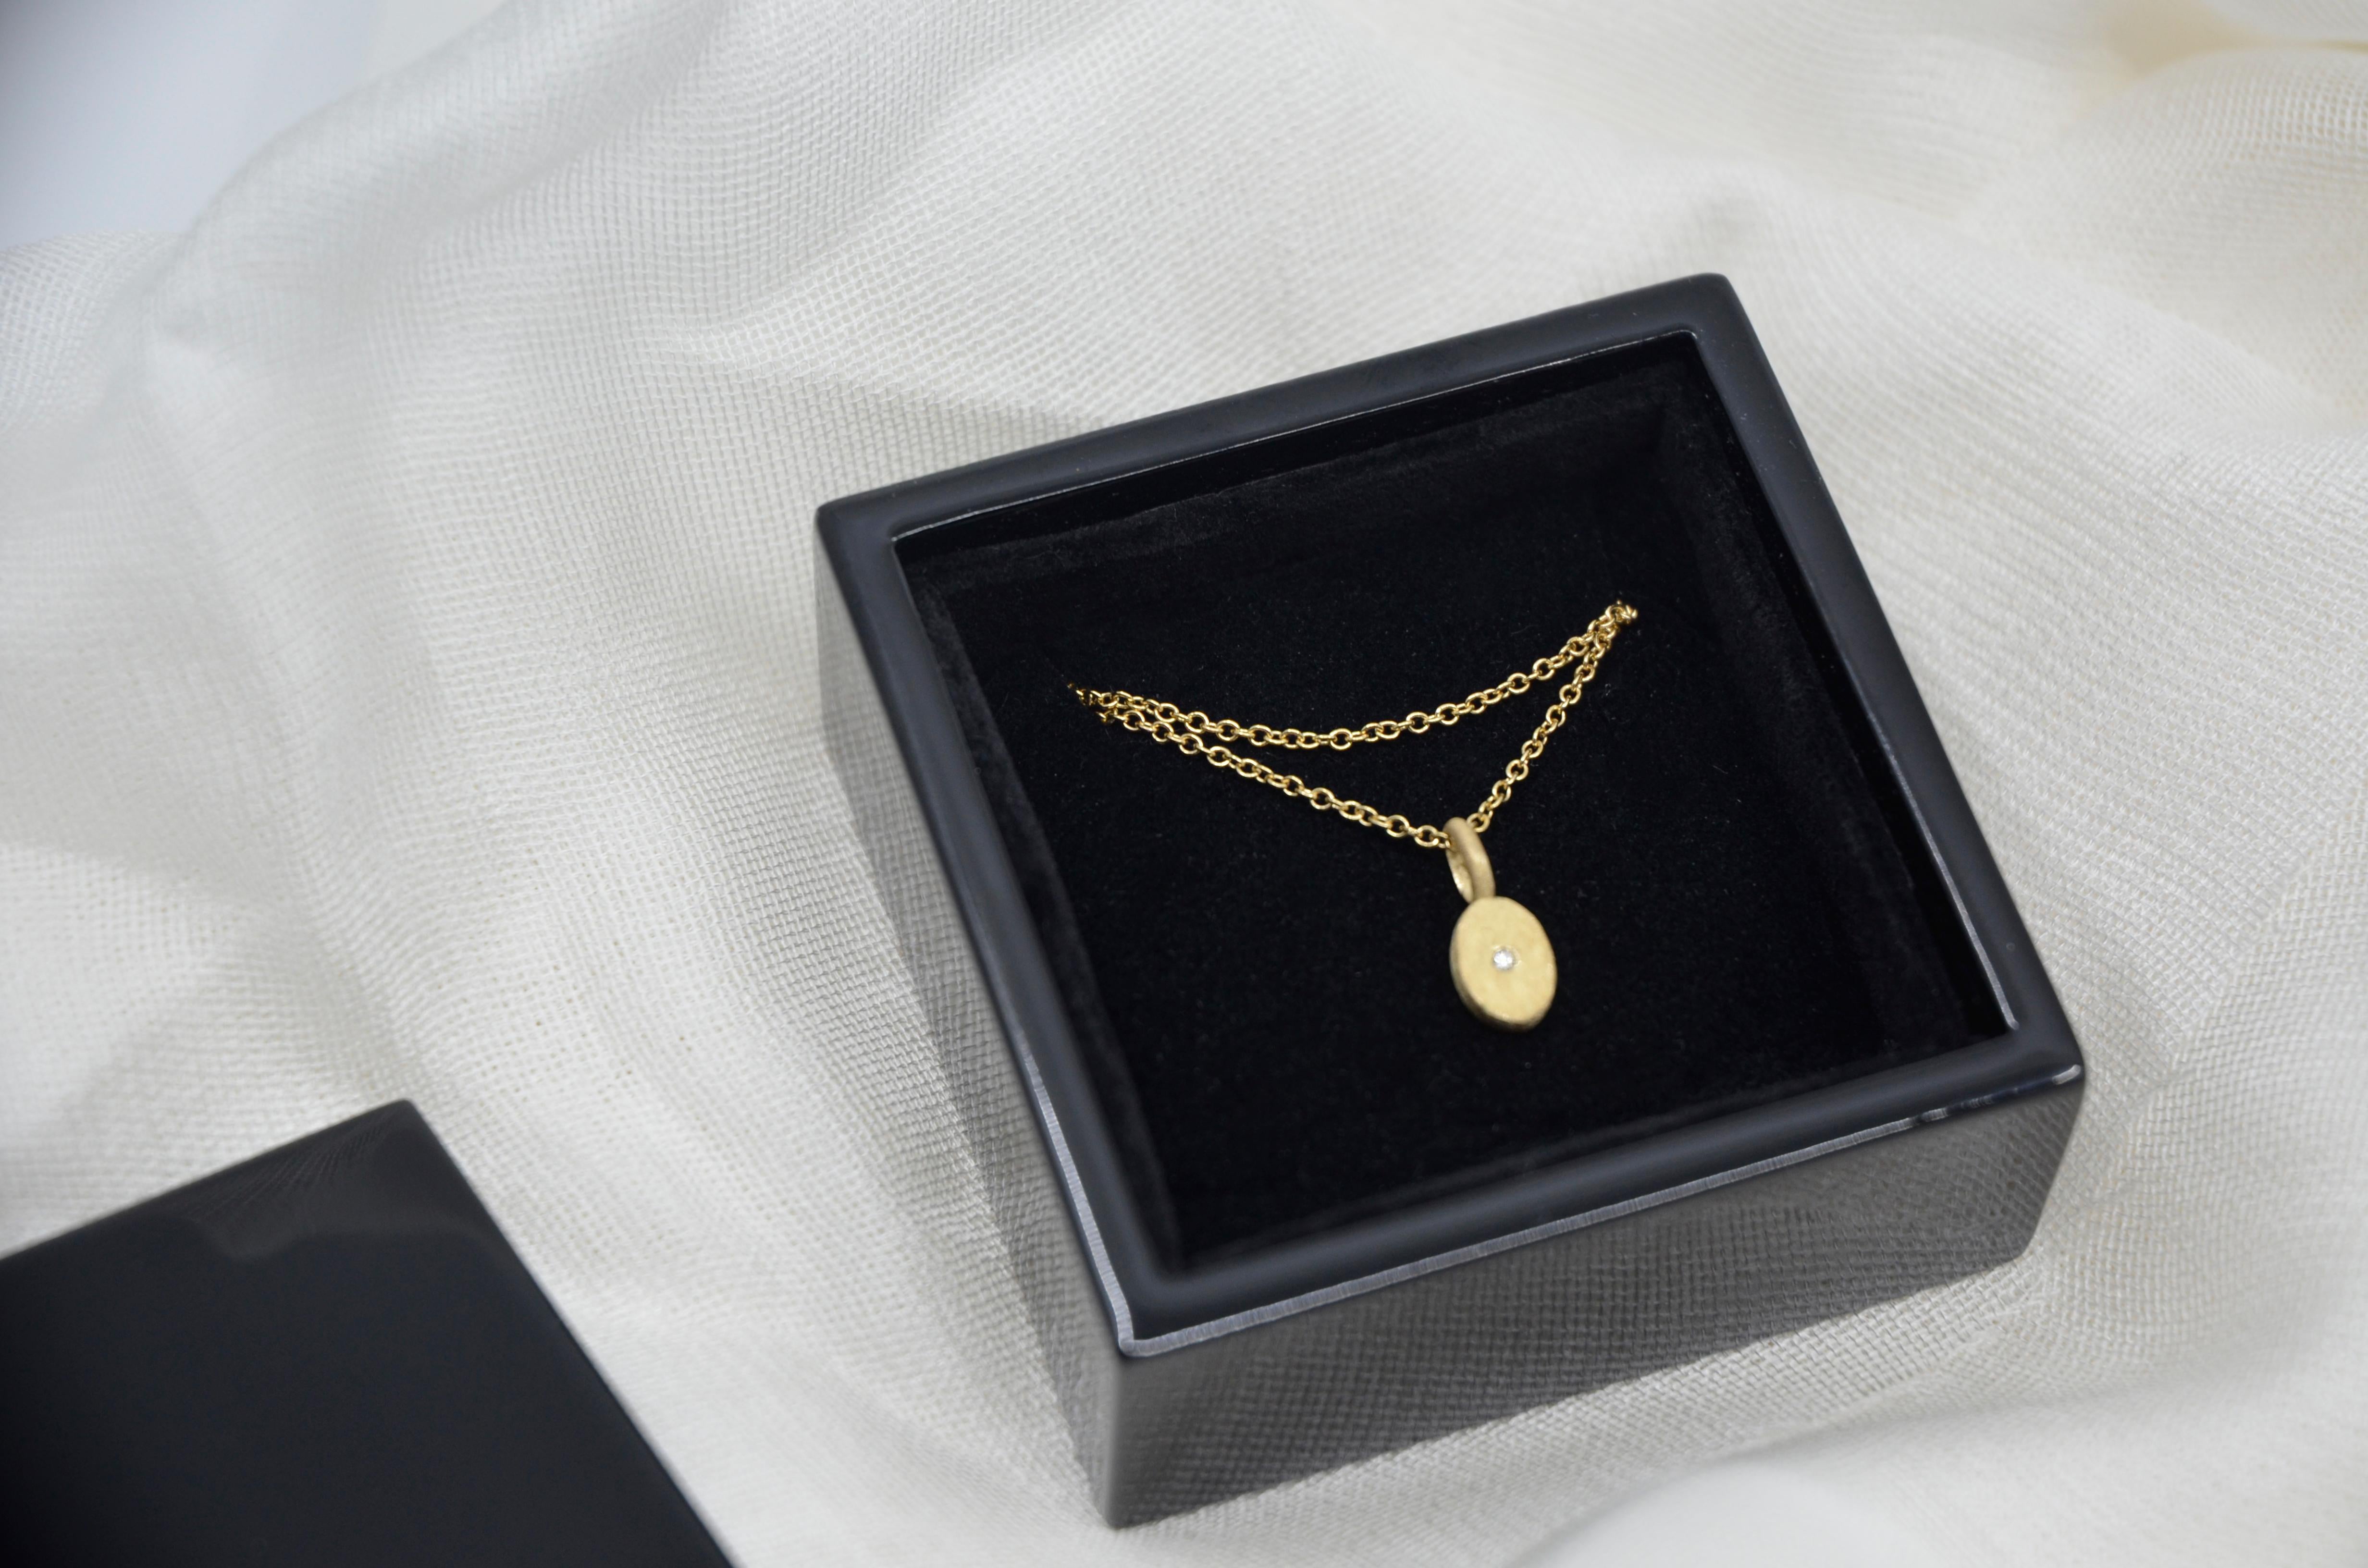 Handcrafted by local goldsmiths in Milan, Italy.

18-carat yellow gold 
1 cm
White diamond 0,10ct 

Comes with custom Japanese lacquered wooden jewellery box. 
The piece can be made to order with a lead time of approximately 4-5 weeks. Each jewel is